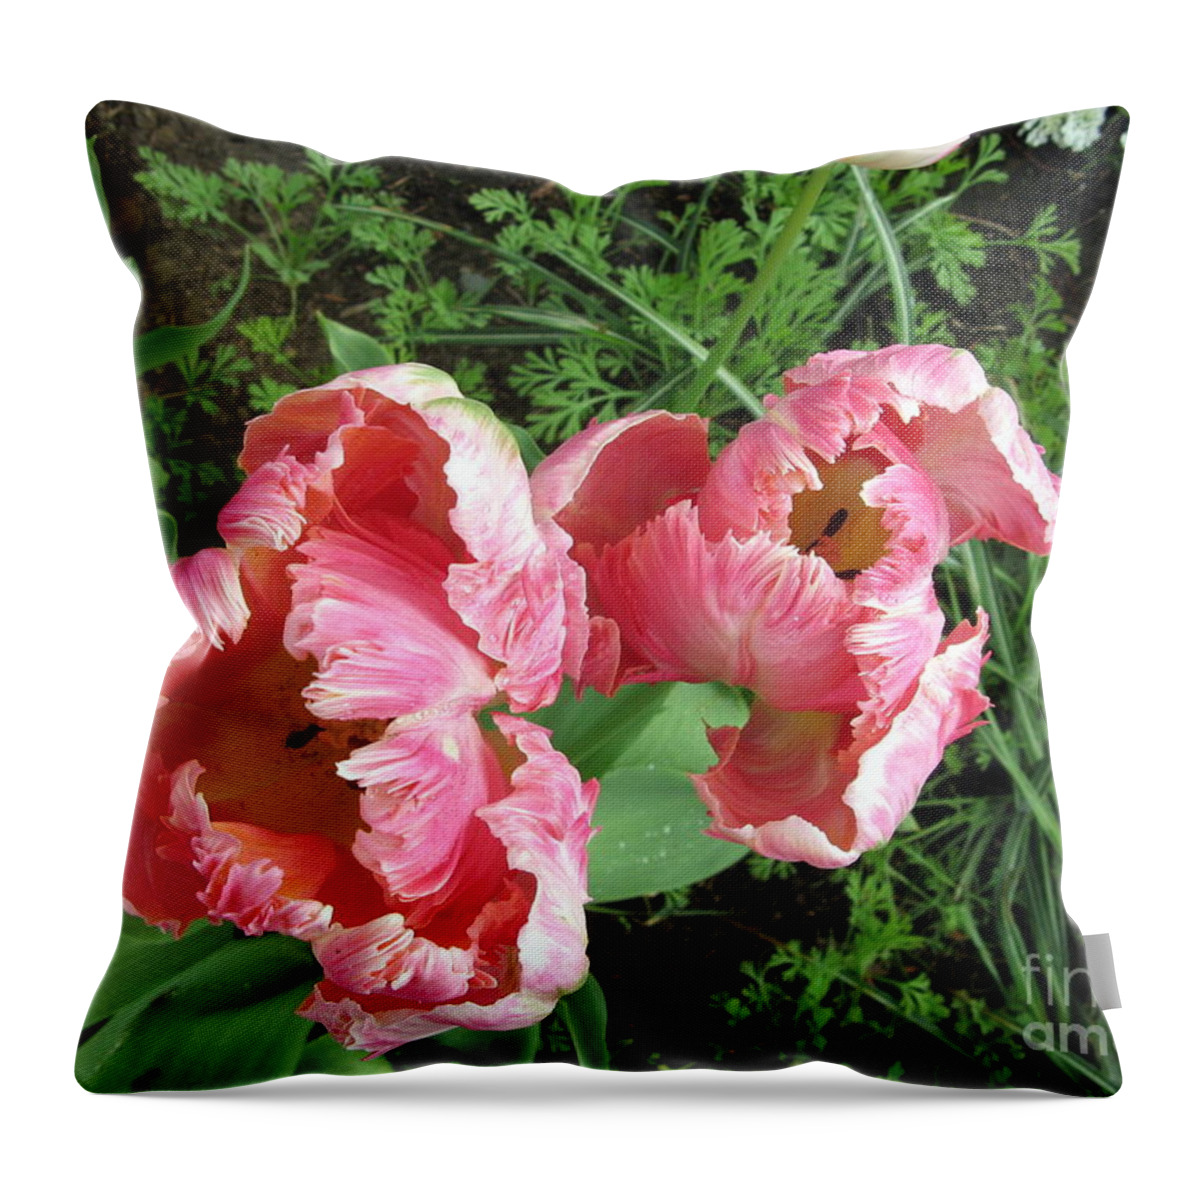  Throw Pillow featuring the photograph Tulips by Mars Besso